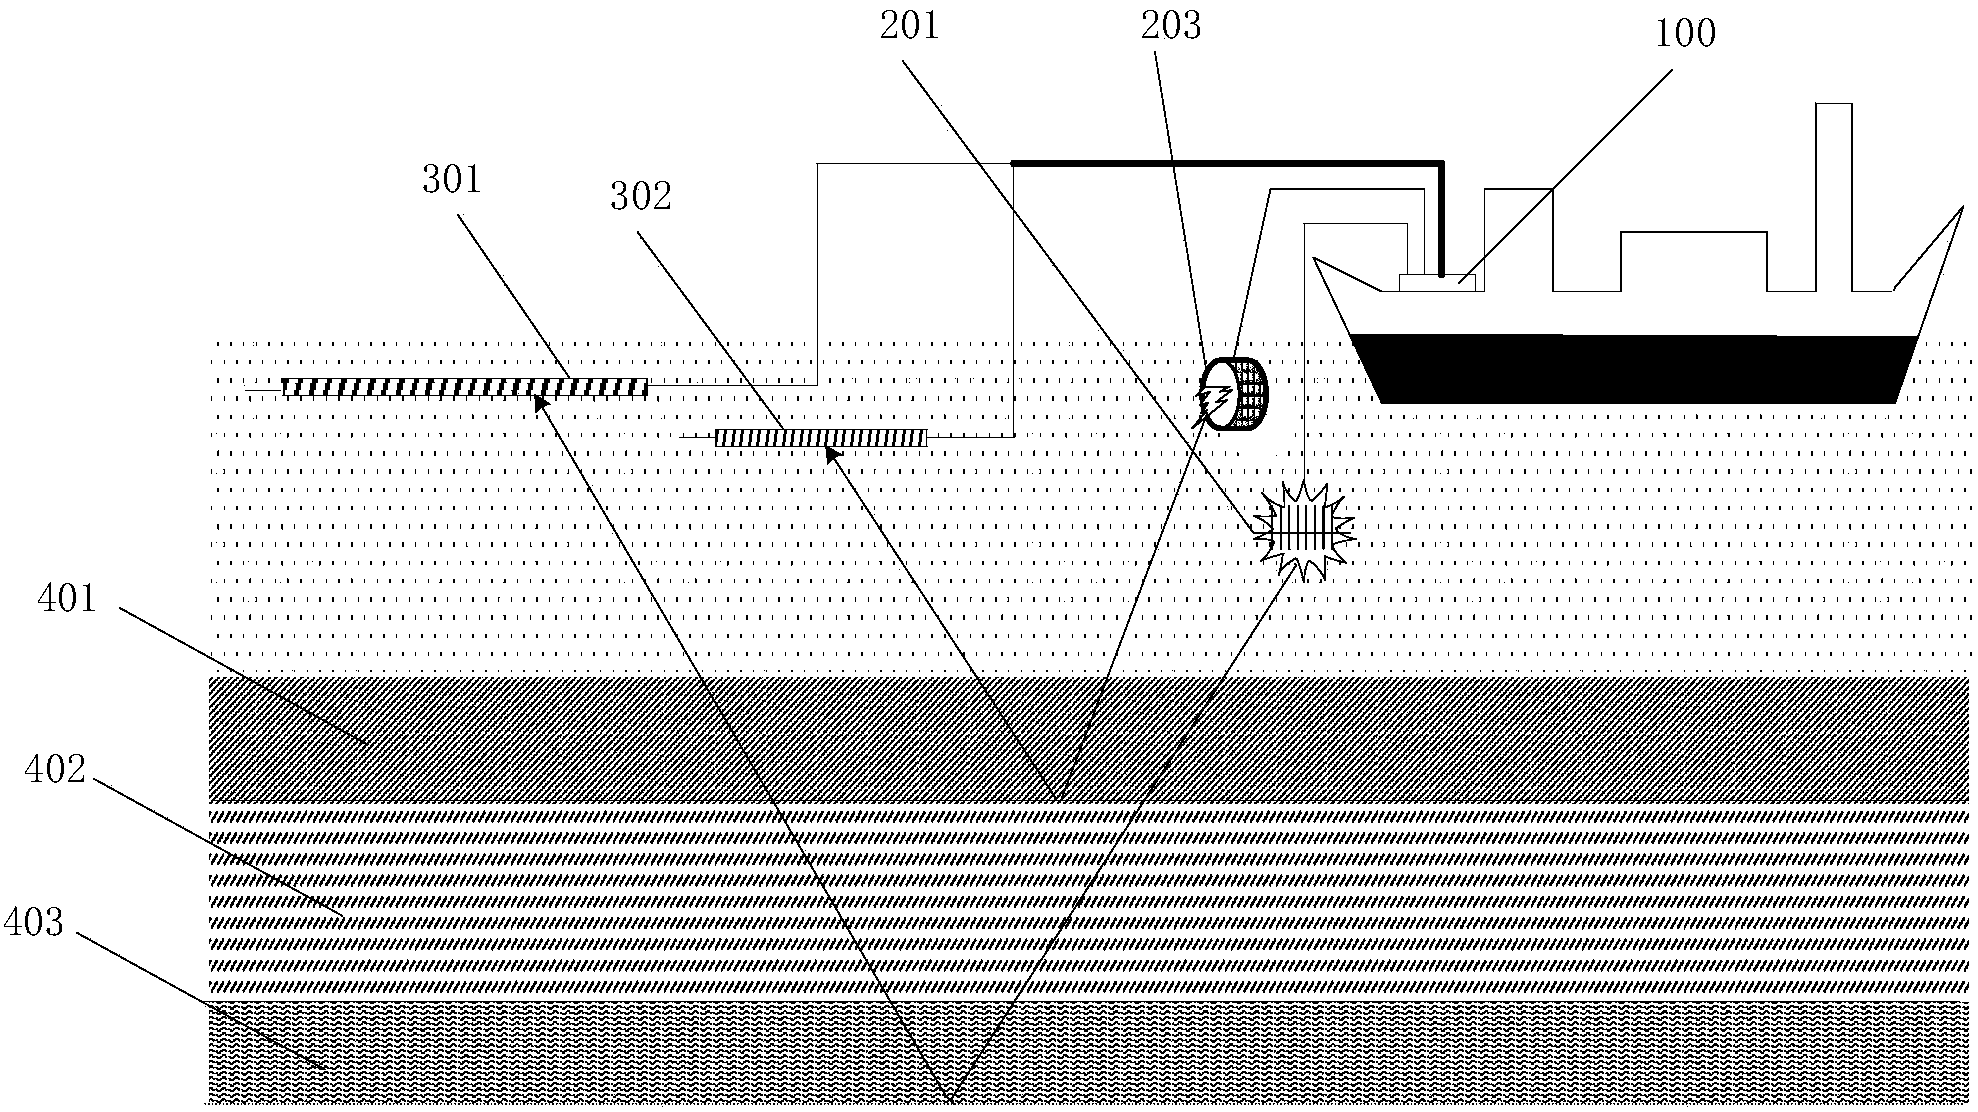 Multi-earthquake-source multi-towline trigger timing control system and method